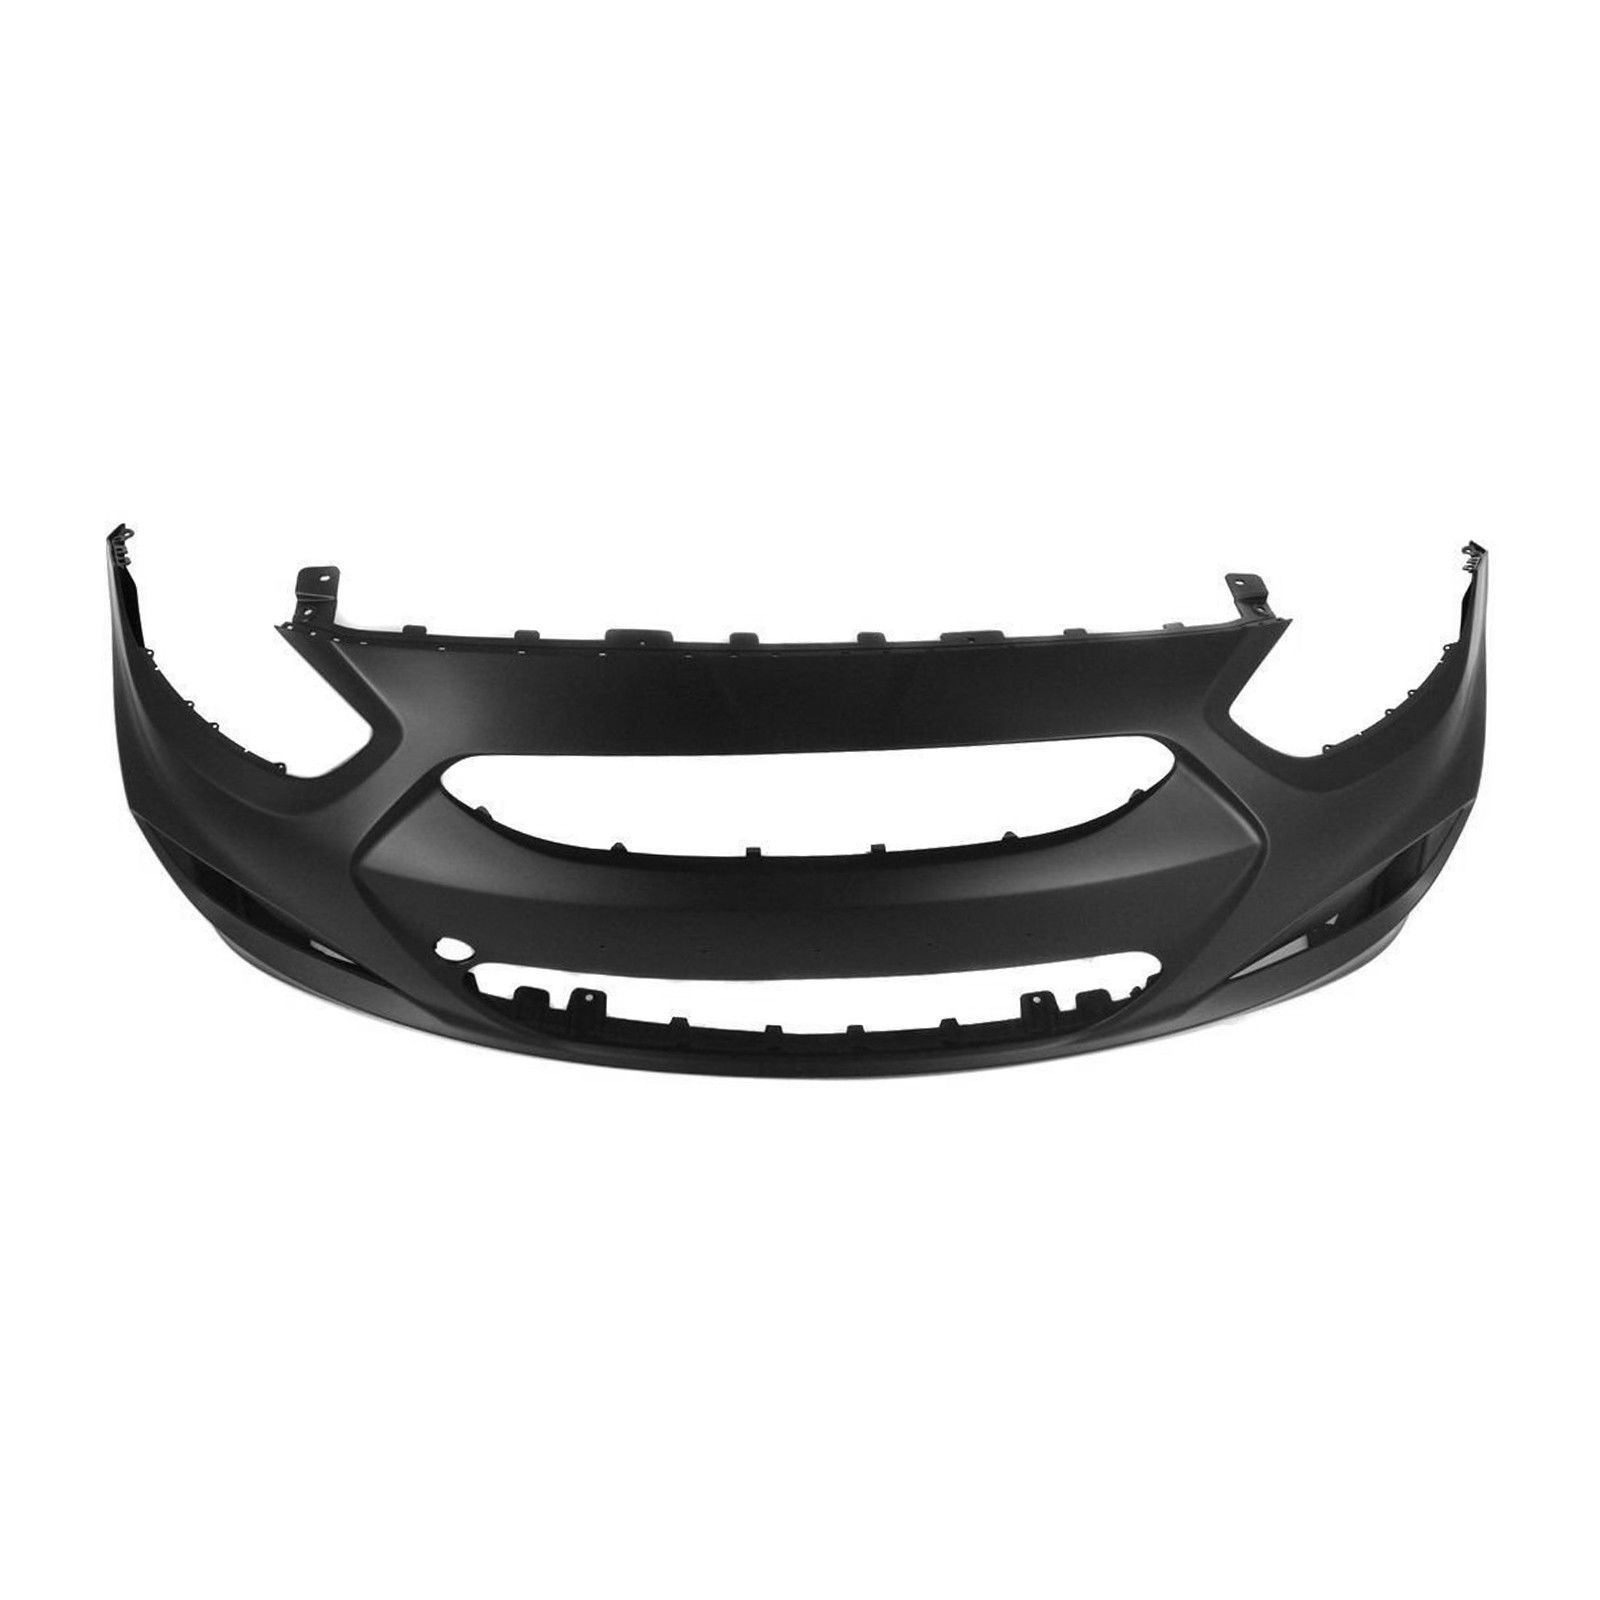 2012-2013 HYUNDAI ACCENT Front Bumper Cover SEDAN / HATCHBACK Painted to Match